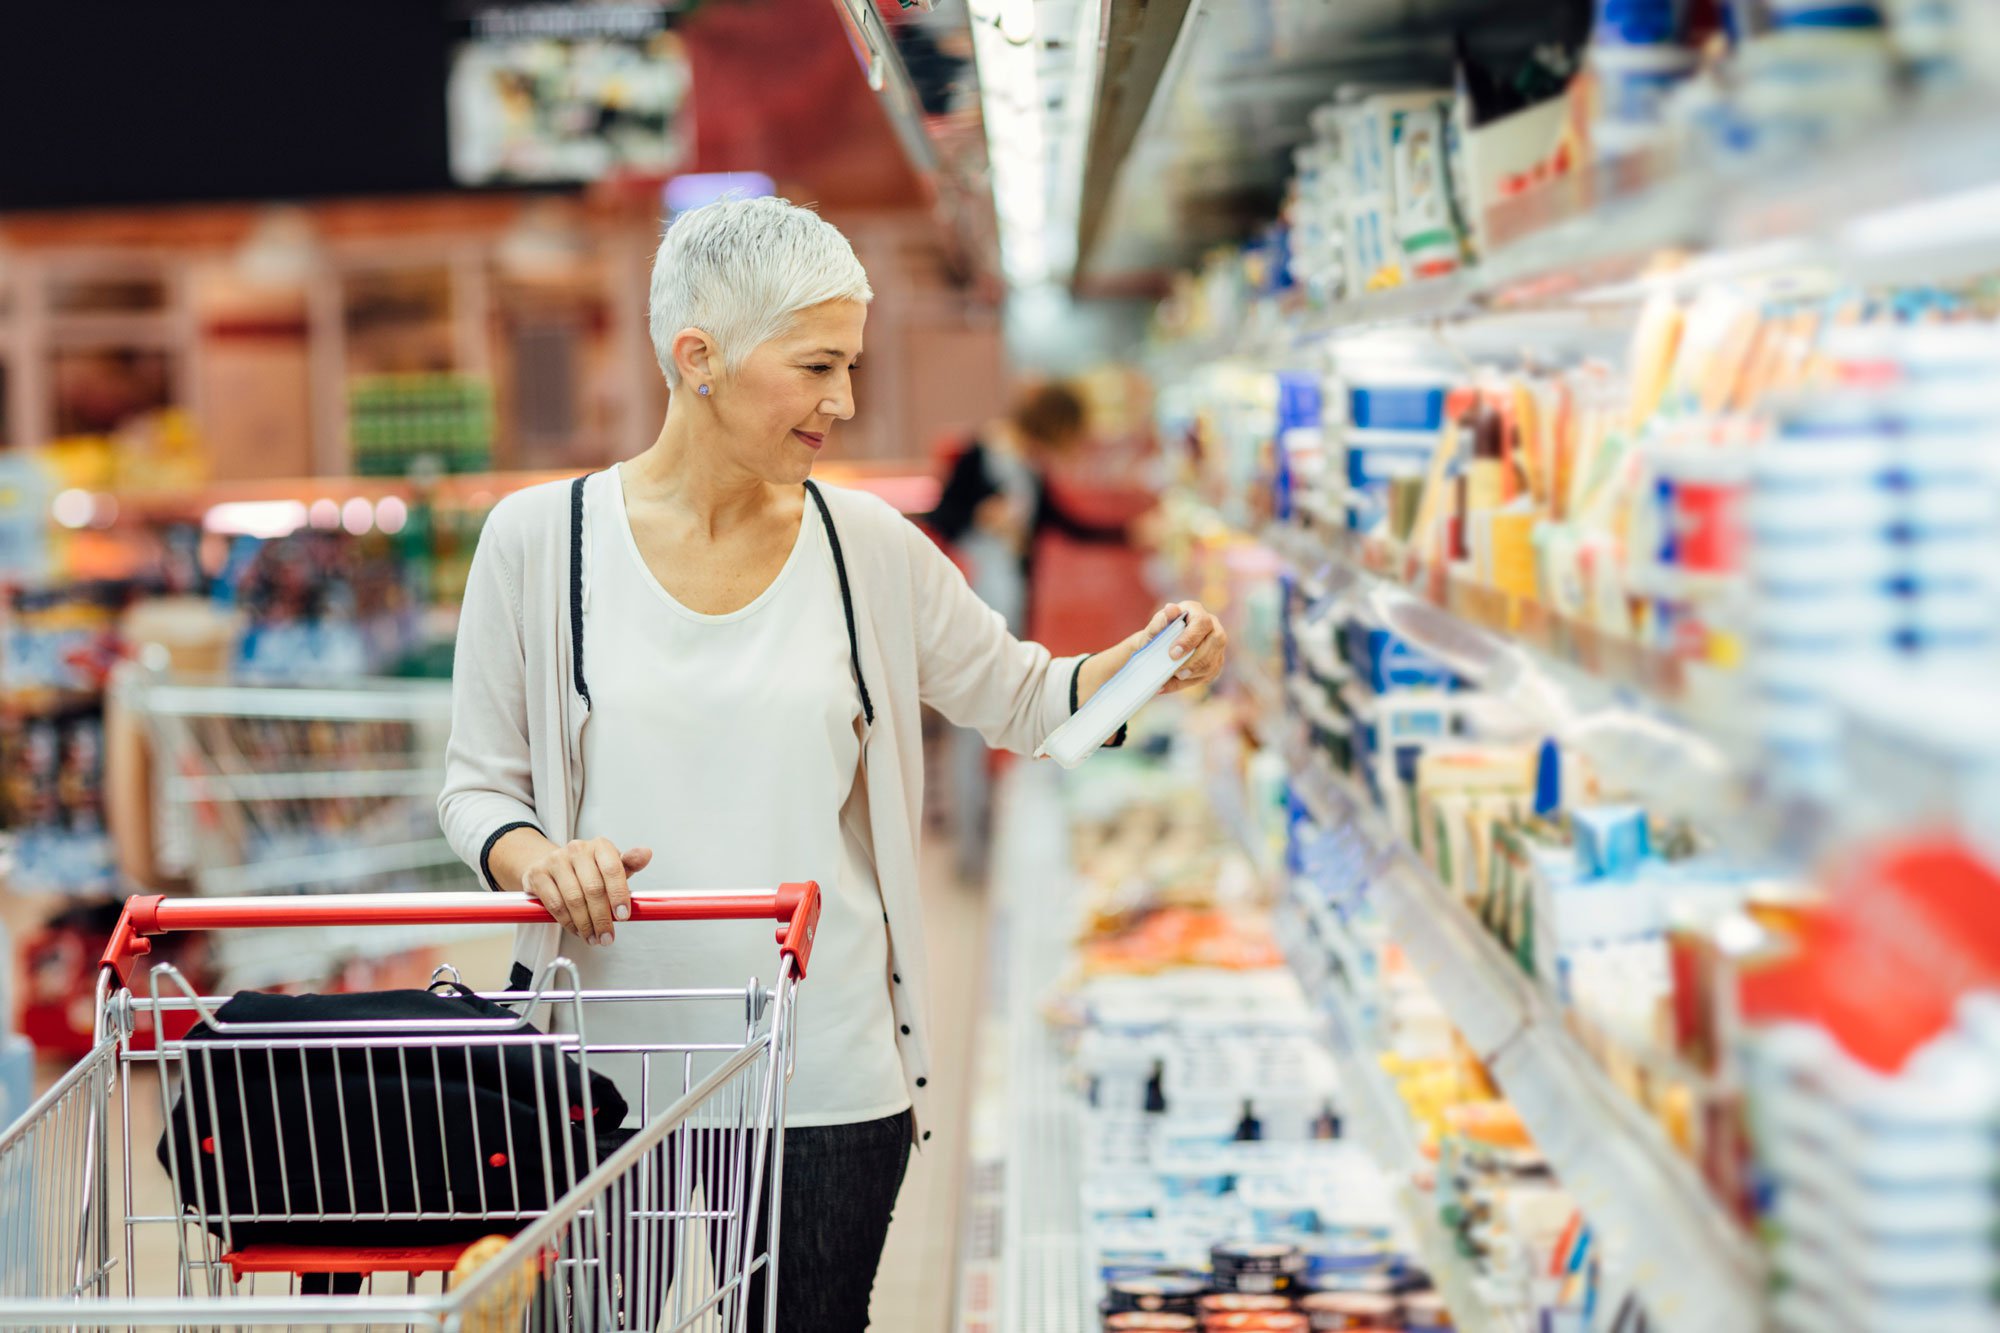 Woman reading nutrition label on dairy product at the grocery store